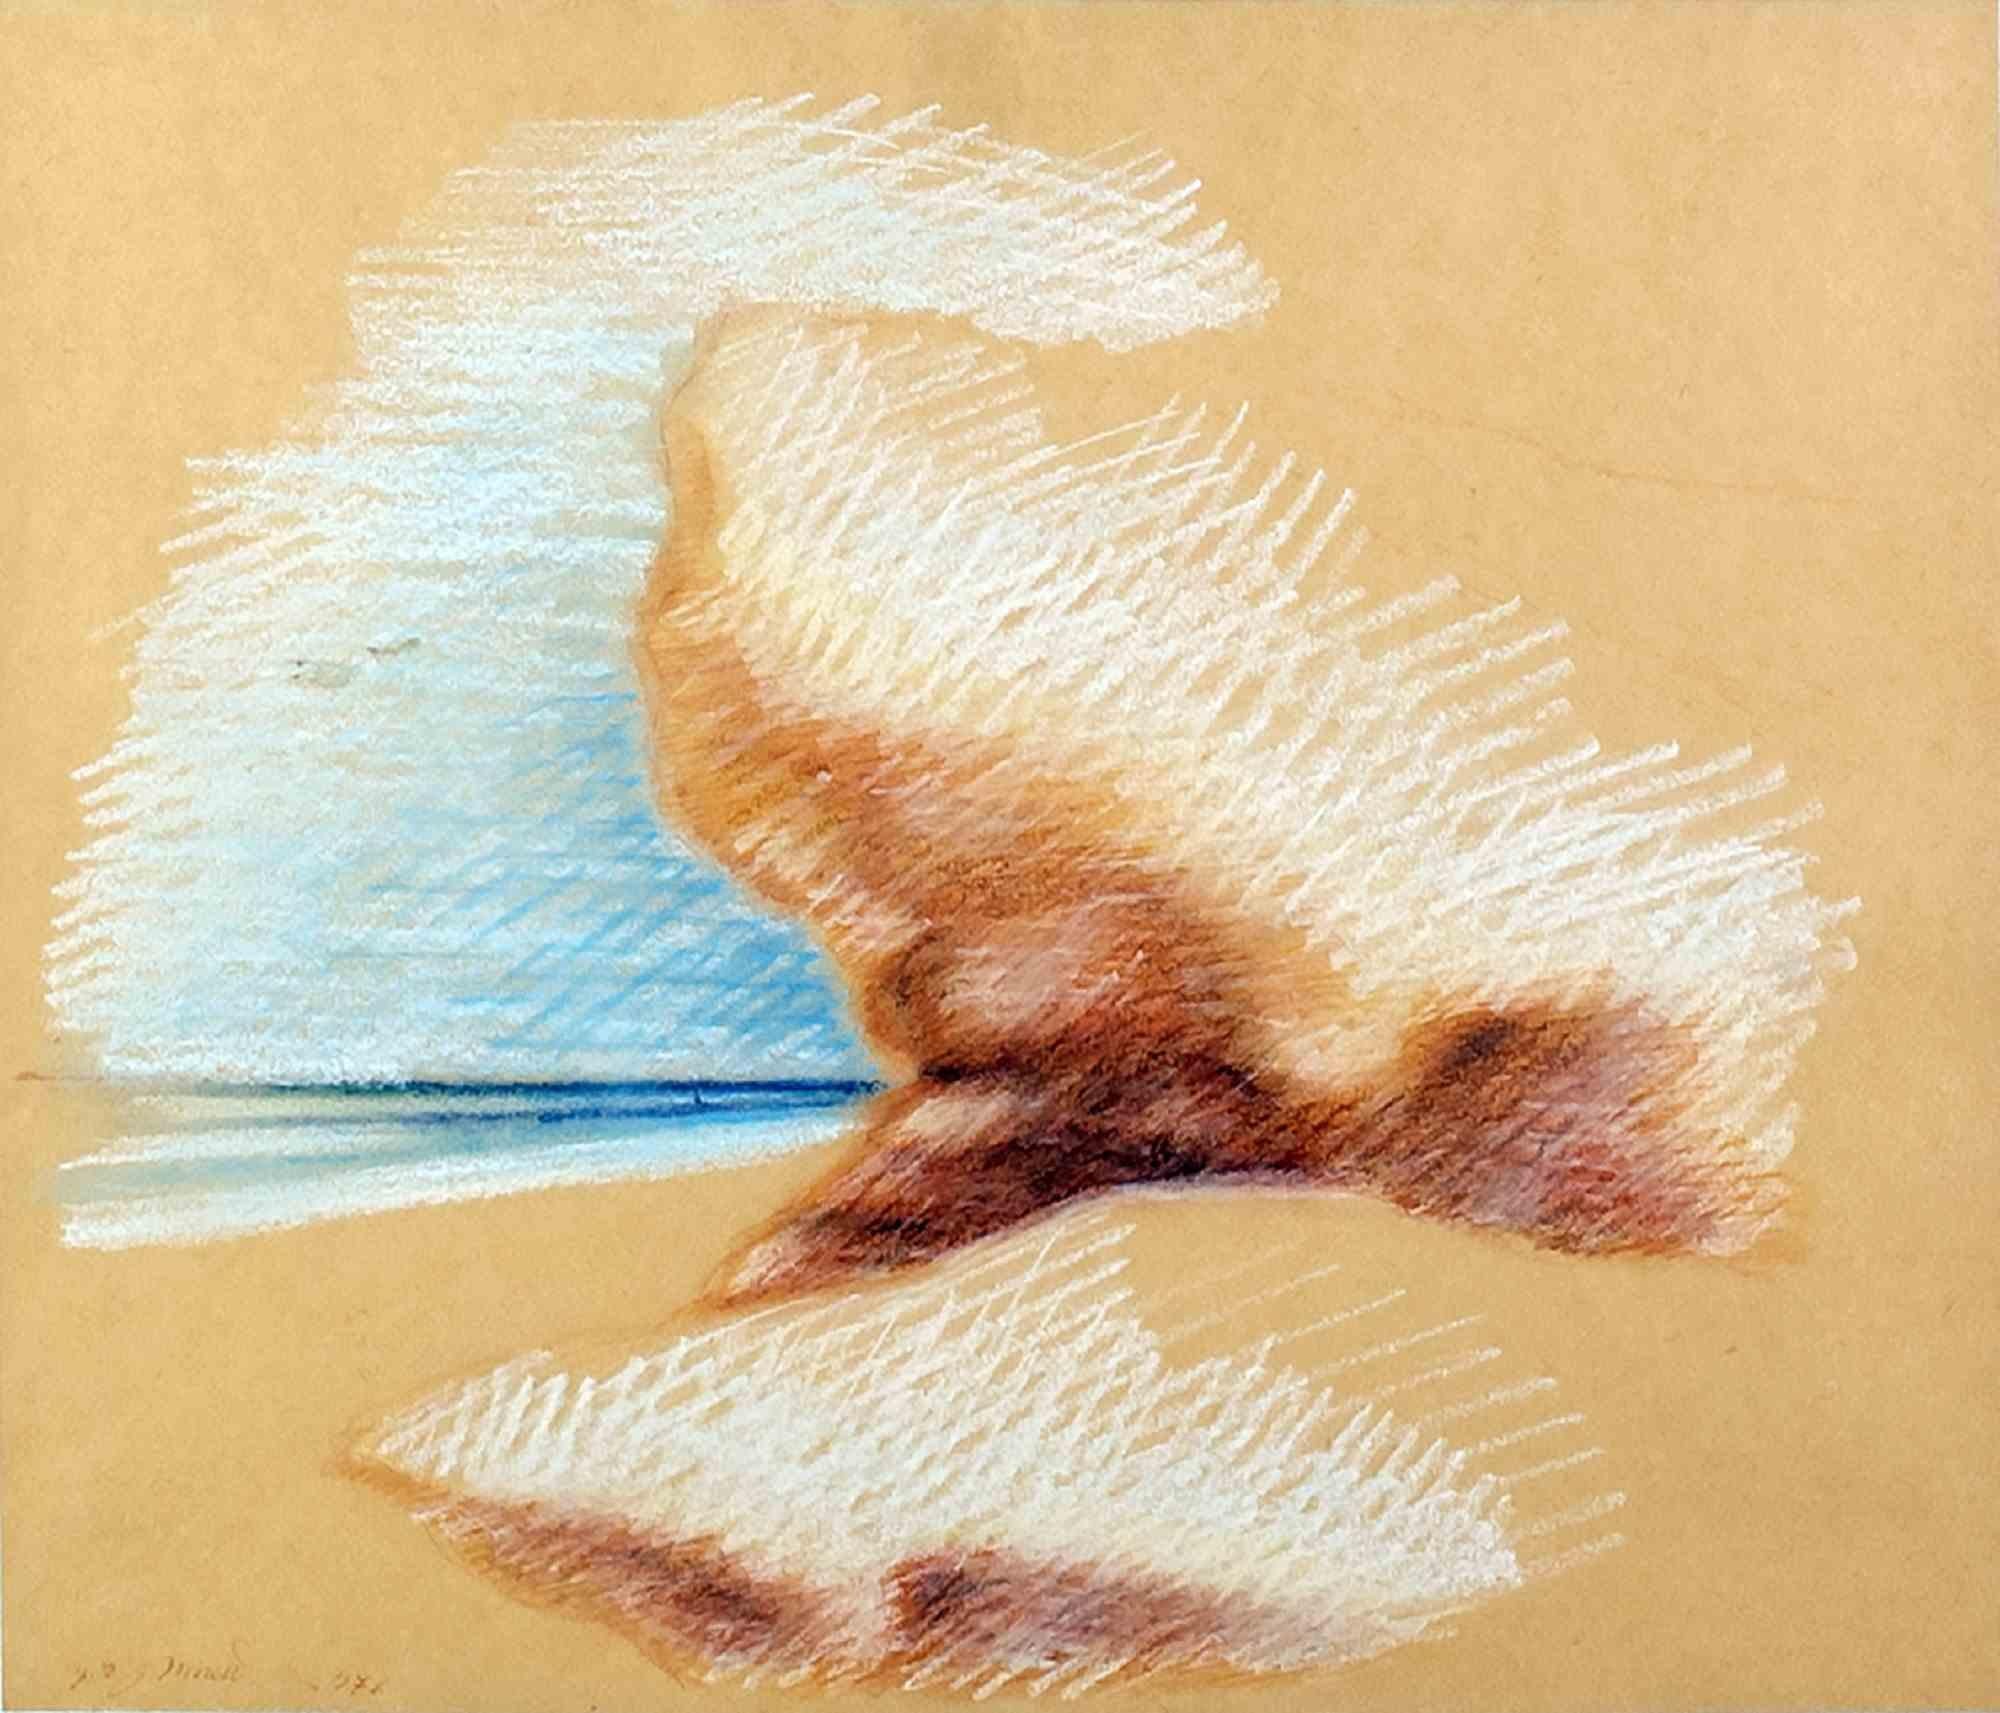 Dunes - Pastel Drawing by Mario Moretti - 1976